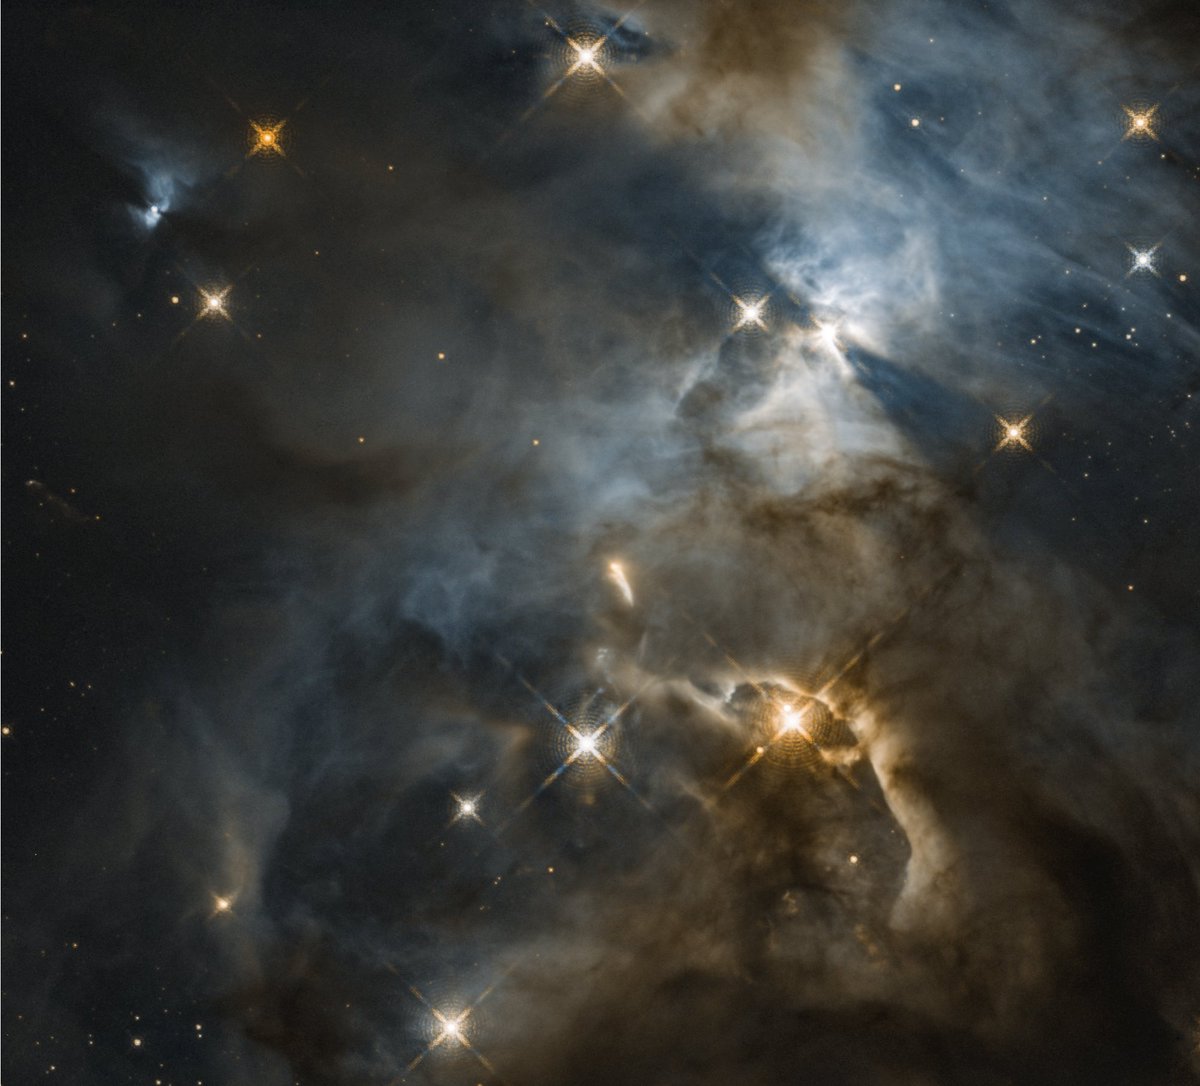 April showers bring May flowers. 🌼 In 2018, Hubble captured this image of the Serpens Nebula, a star-forming region that resembles stormy clouds on a spring day. This reflection nebula is home to a unique feature known as the “Bat Shadow”: bit.ly/3IOR4tk